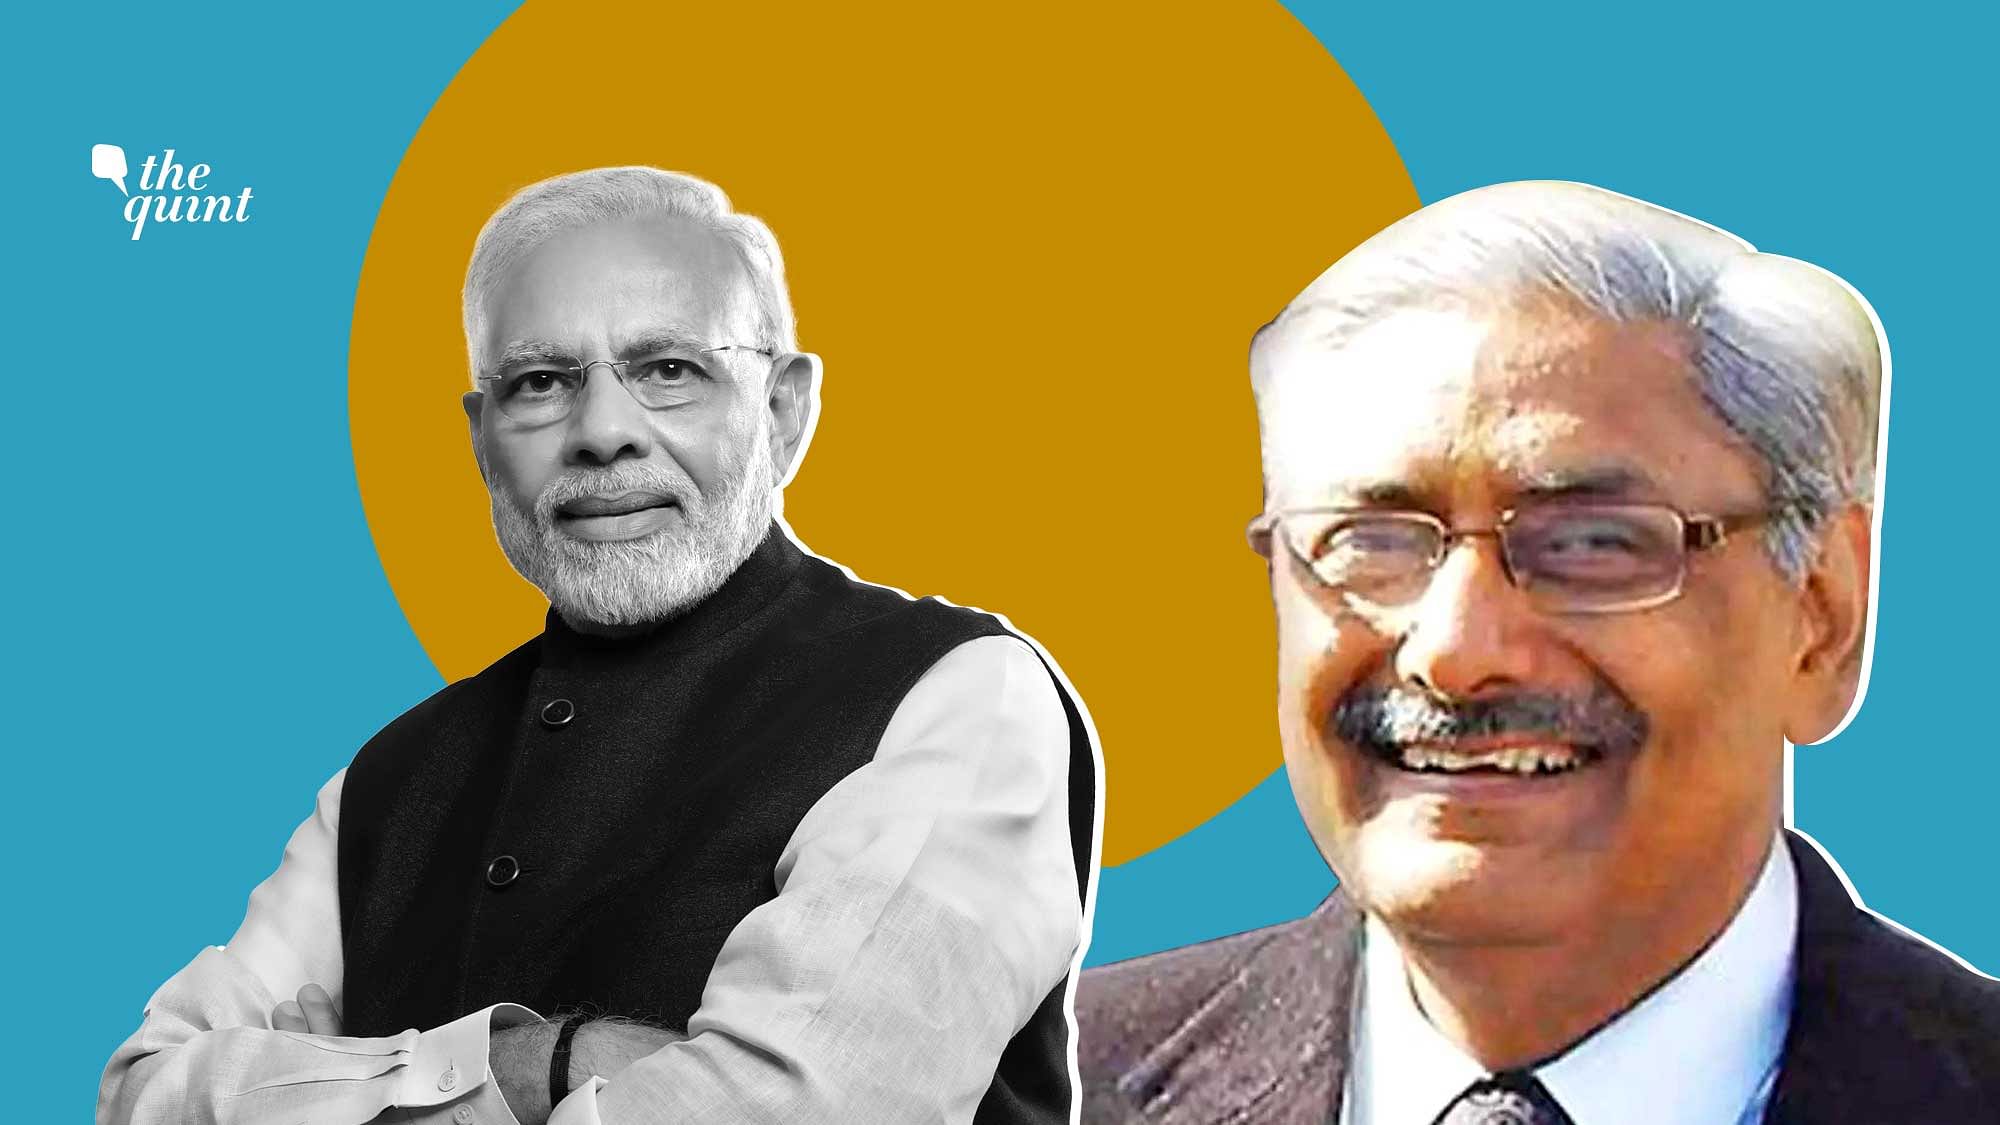 Justice Arun Mishra (R) called Prime Minister Narendra Modi (L)“a versatile genius” and an “internationally-acclaimed visionary”.